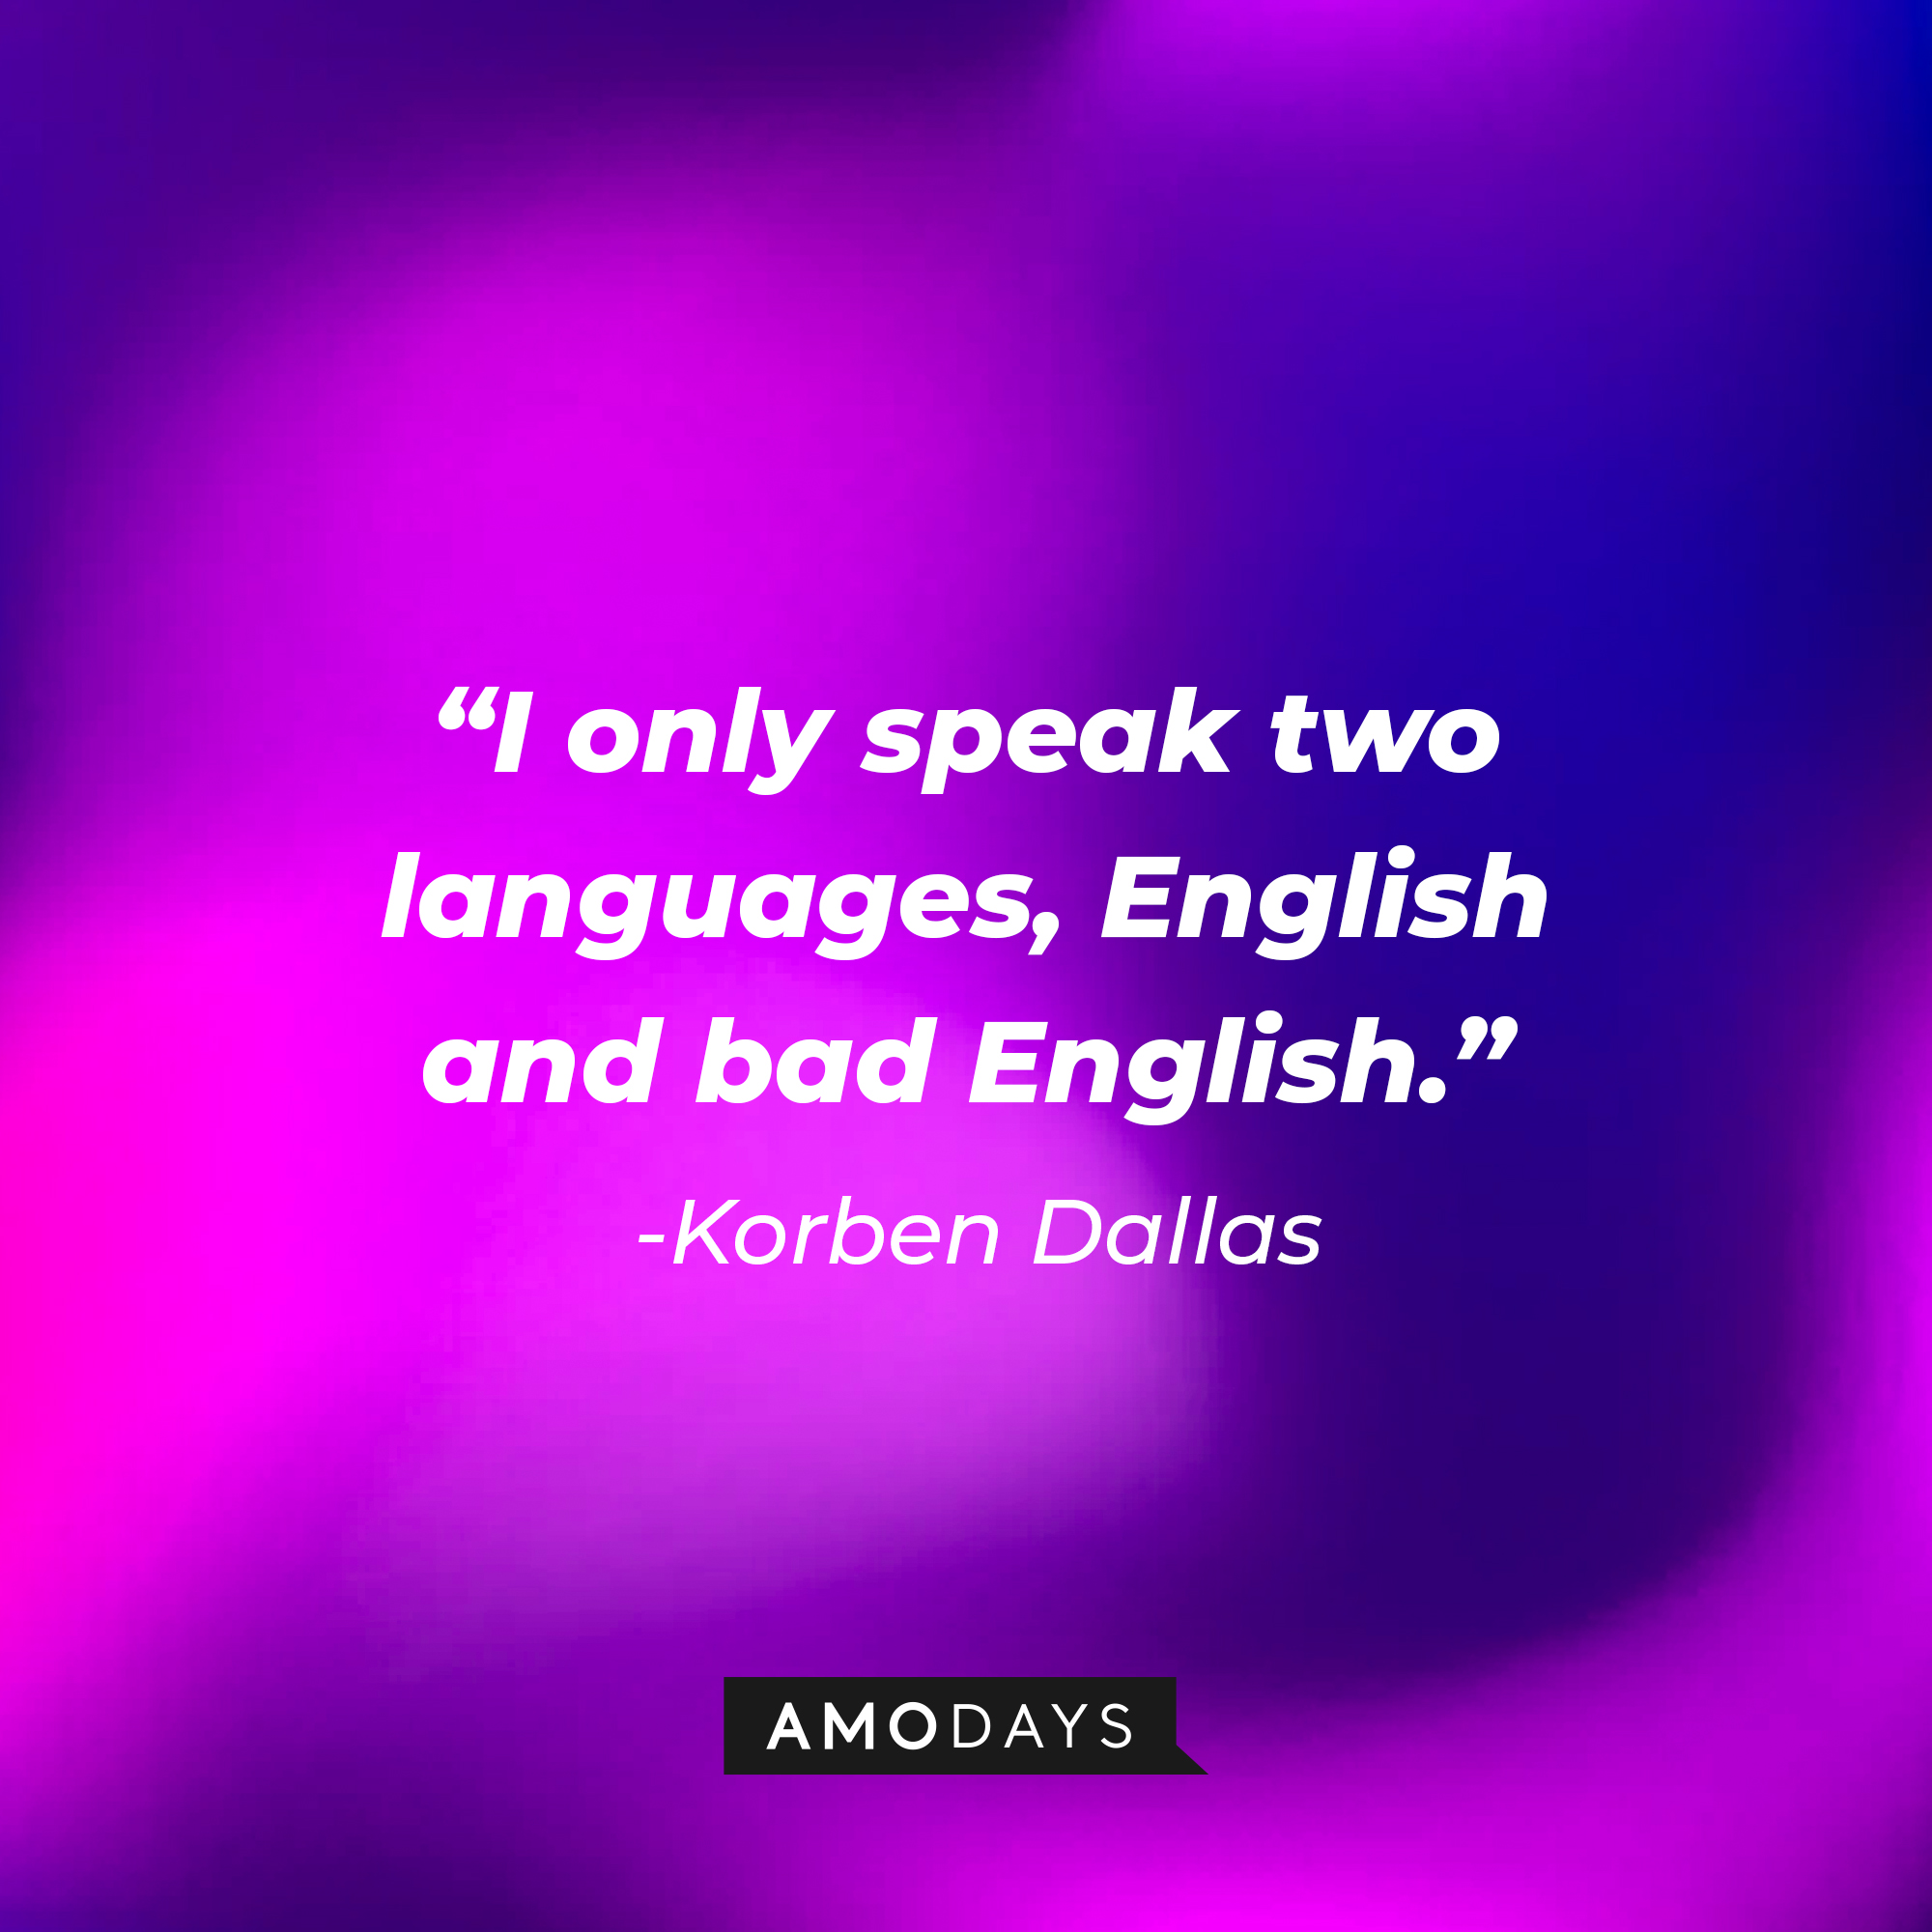 Korben Dallas' quote: "I only speak two languages, English and bad English" | Source: Amodays